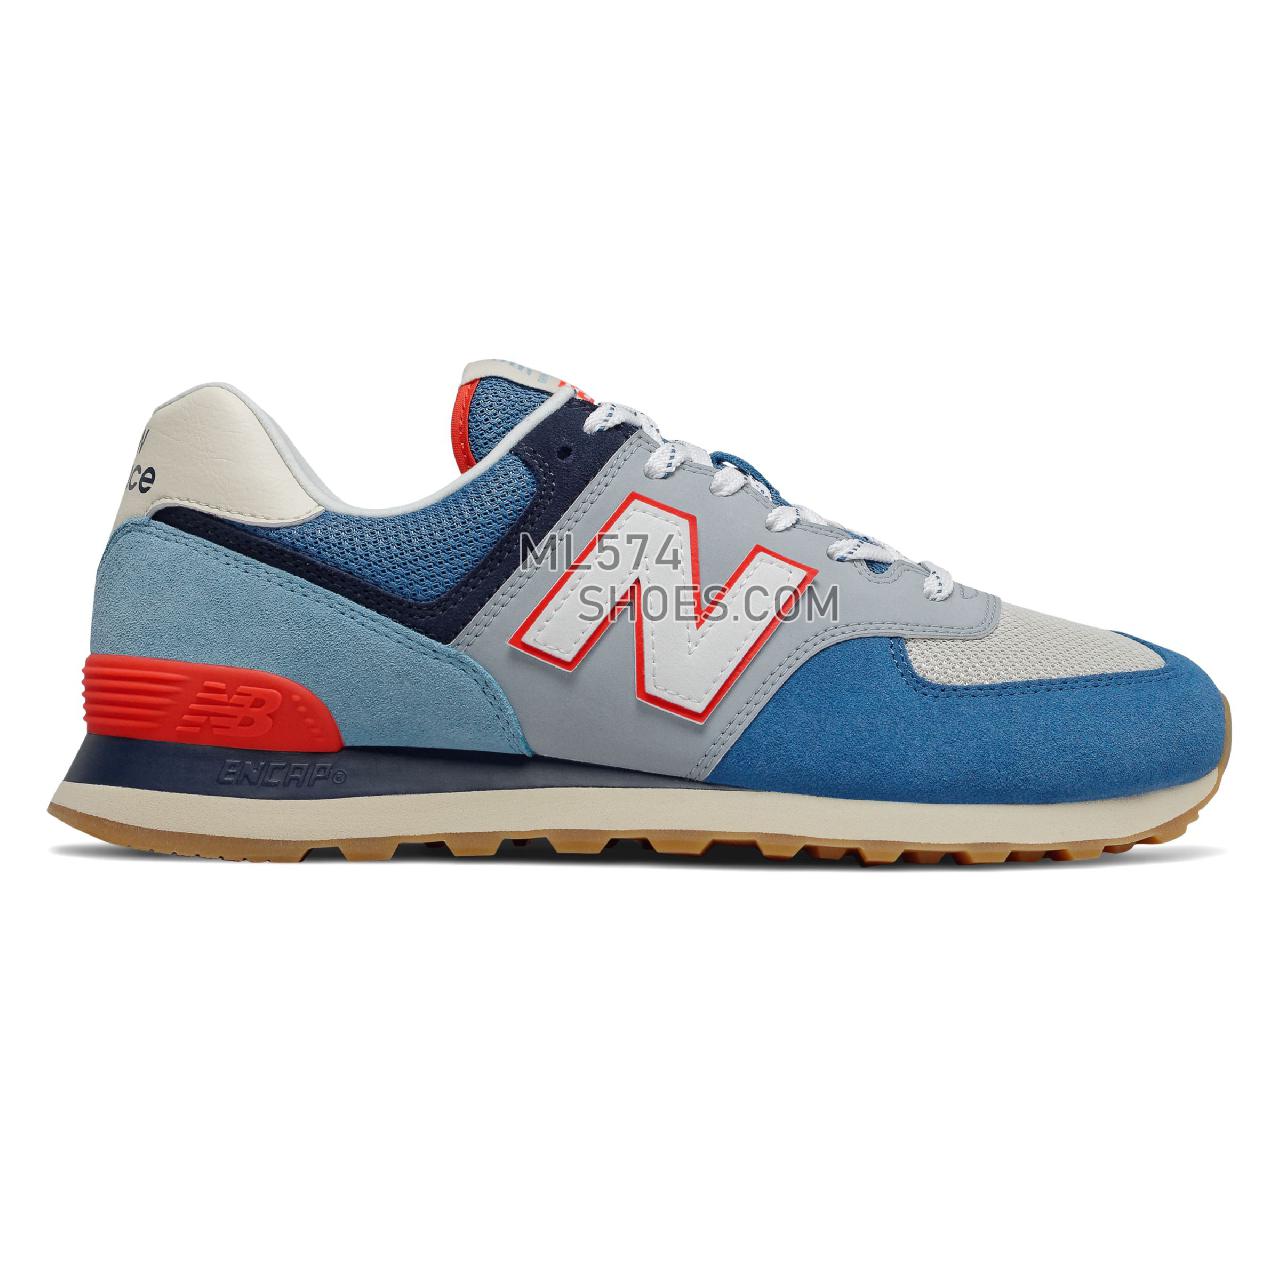 New Balance 574 - Men's Classic Sneakers - Mako Blue with Turtle Dove and Neo Flame - ML574SOS